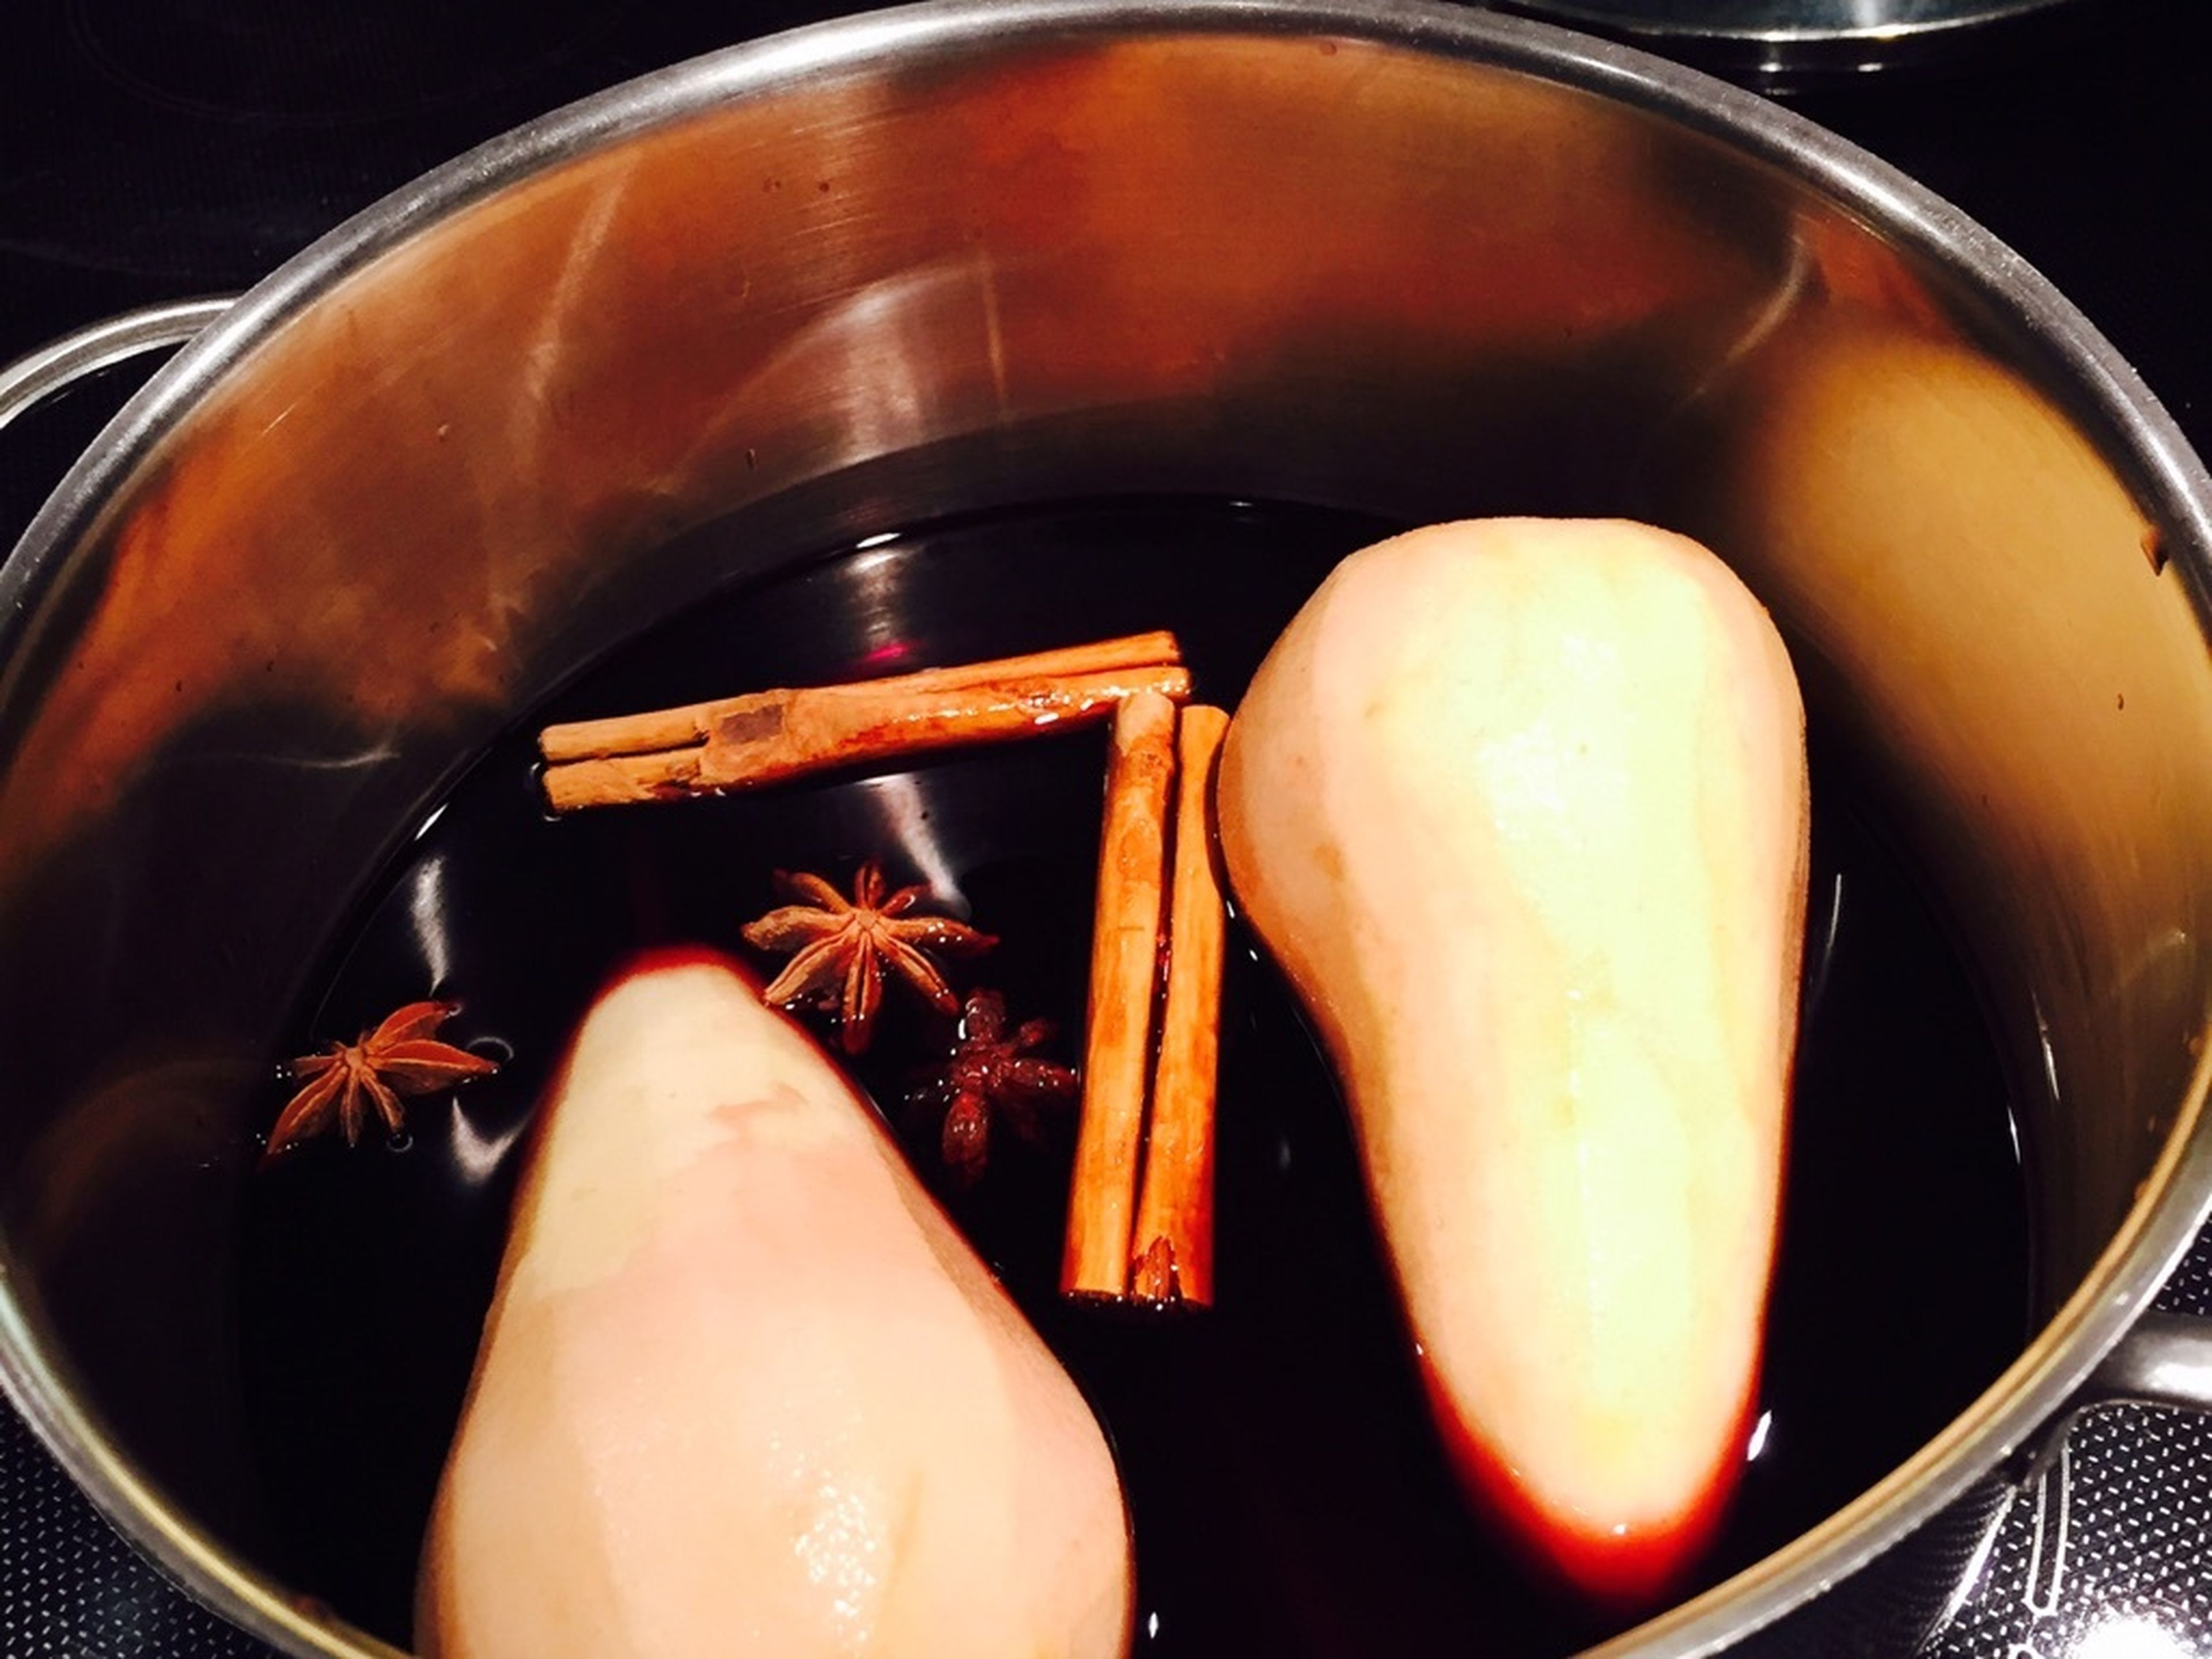 Peel the pears. Pour wine in a pot and add pears, sugar, cinnamon, and star anise.